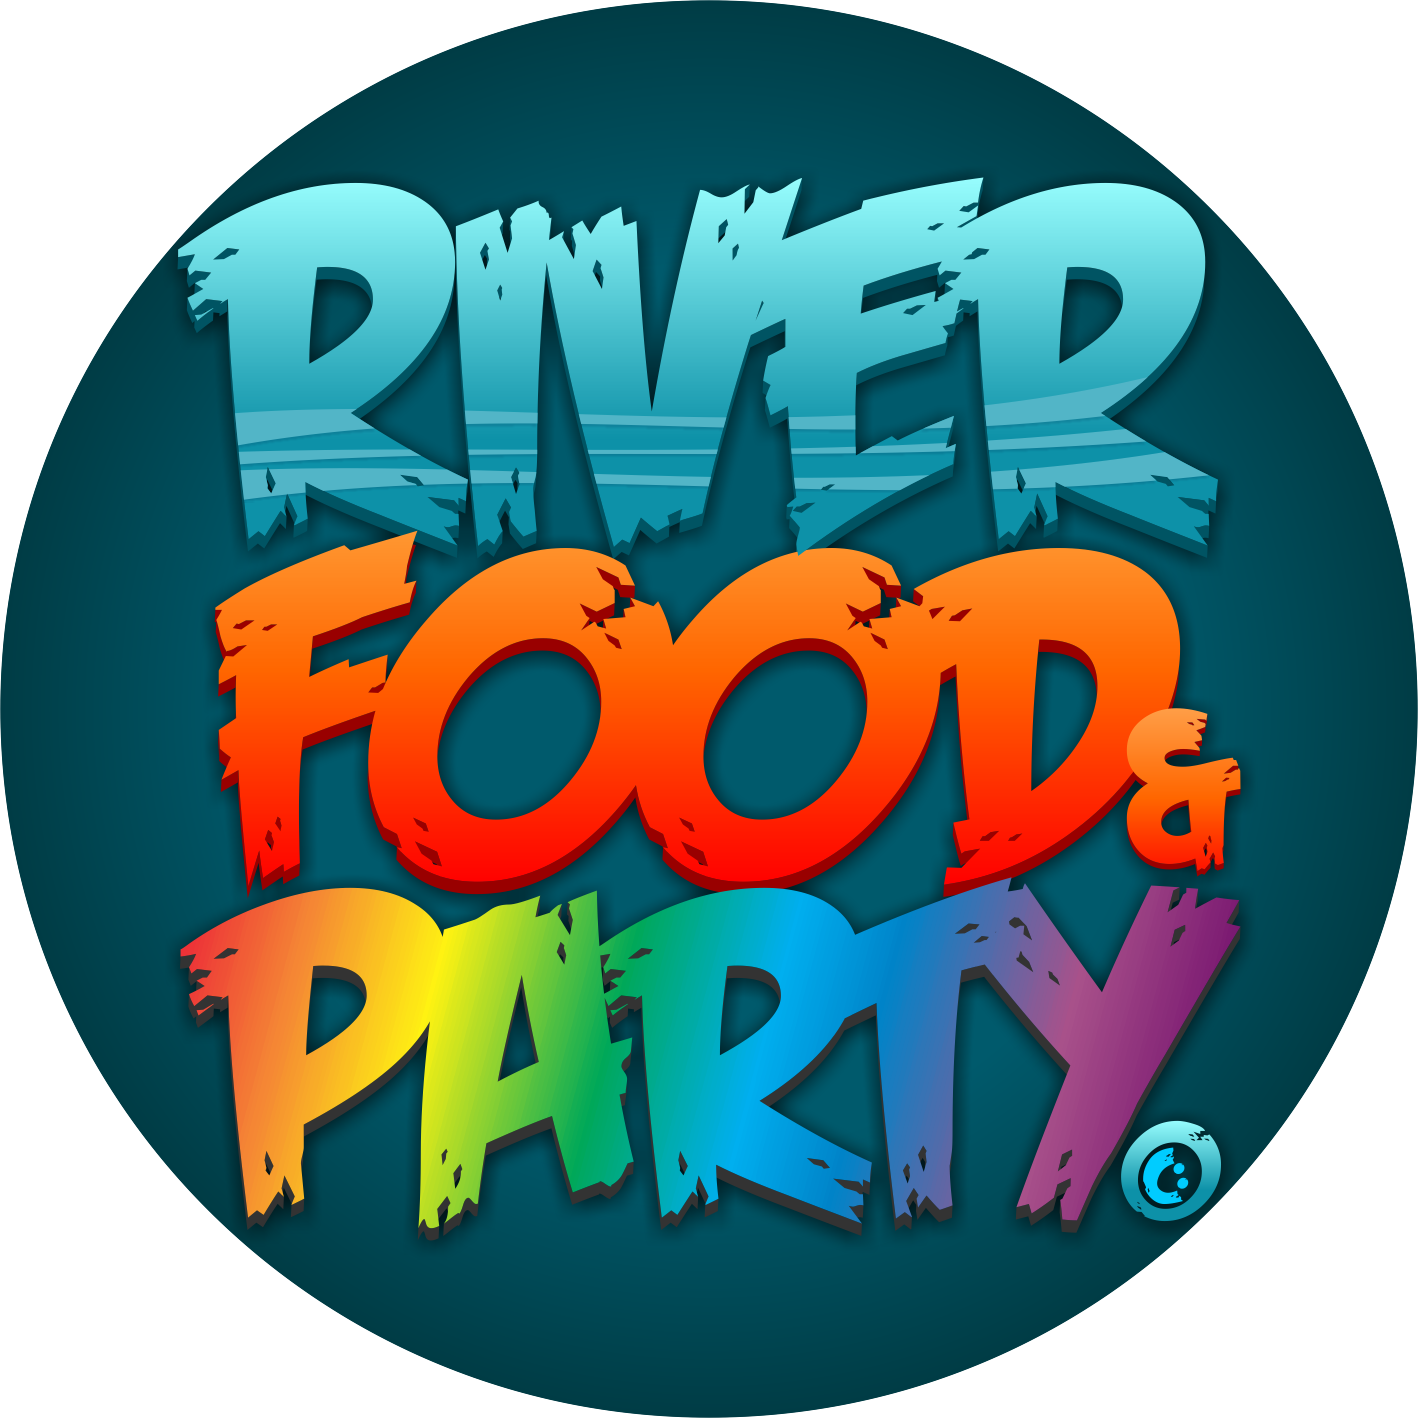 RiverFoodParty